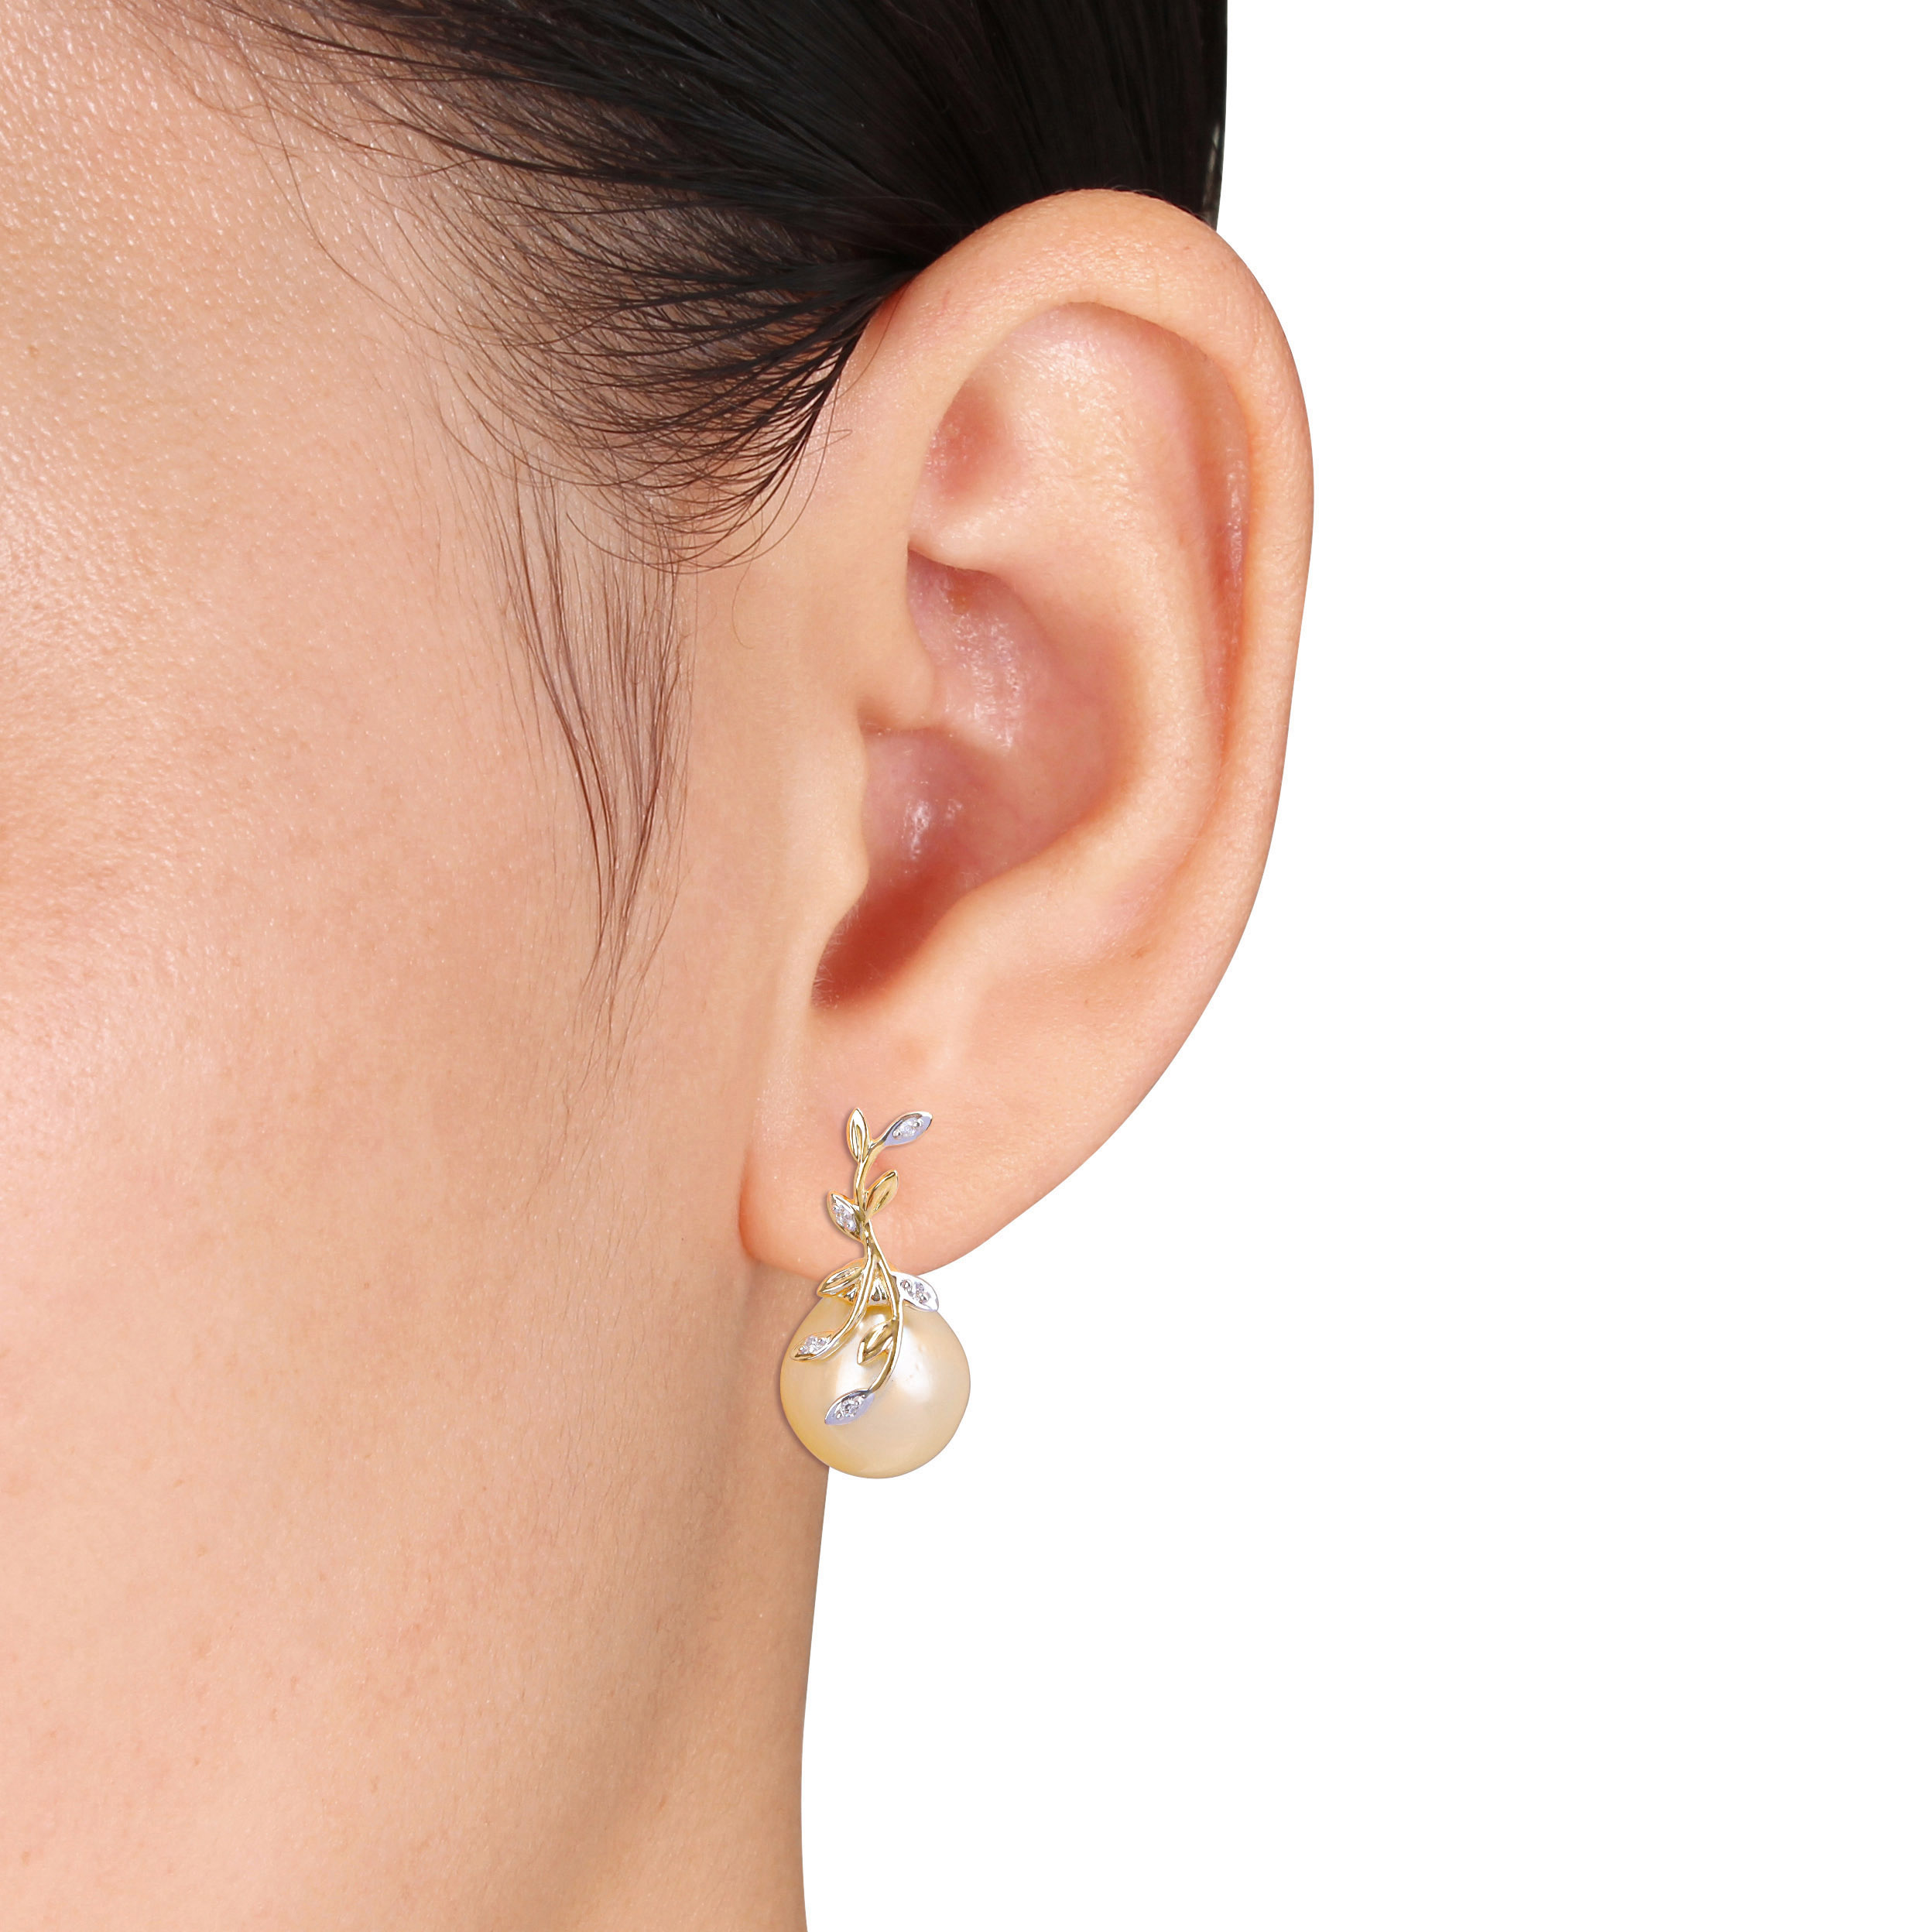 12-12.5 MM Golden Sea Cultured Pearl & Diamond-Accent Leaf Design Earrings in 14k Yellow Gold